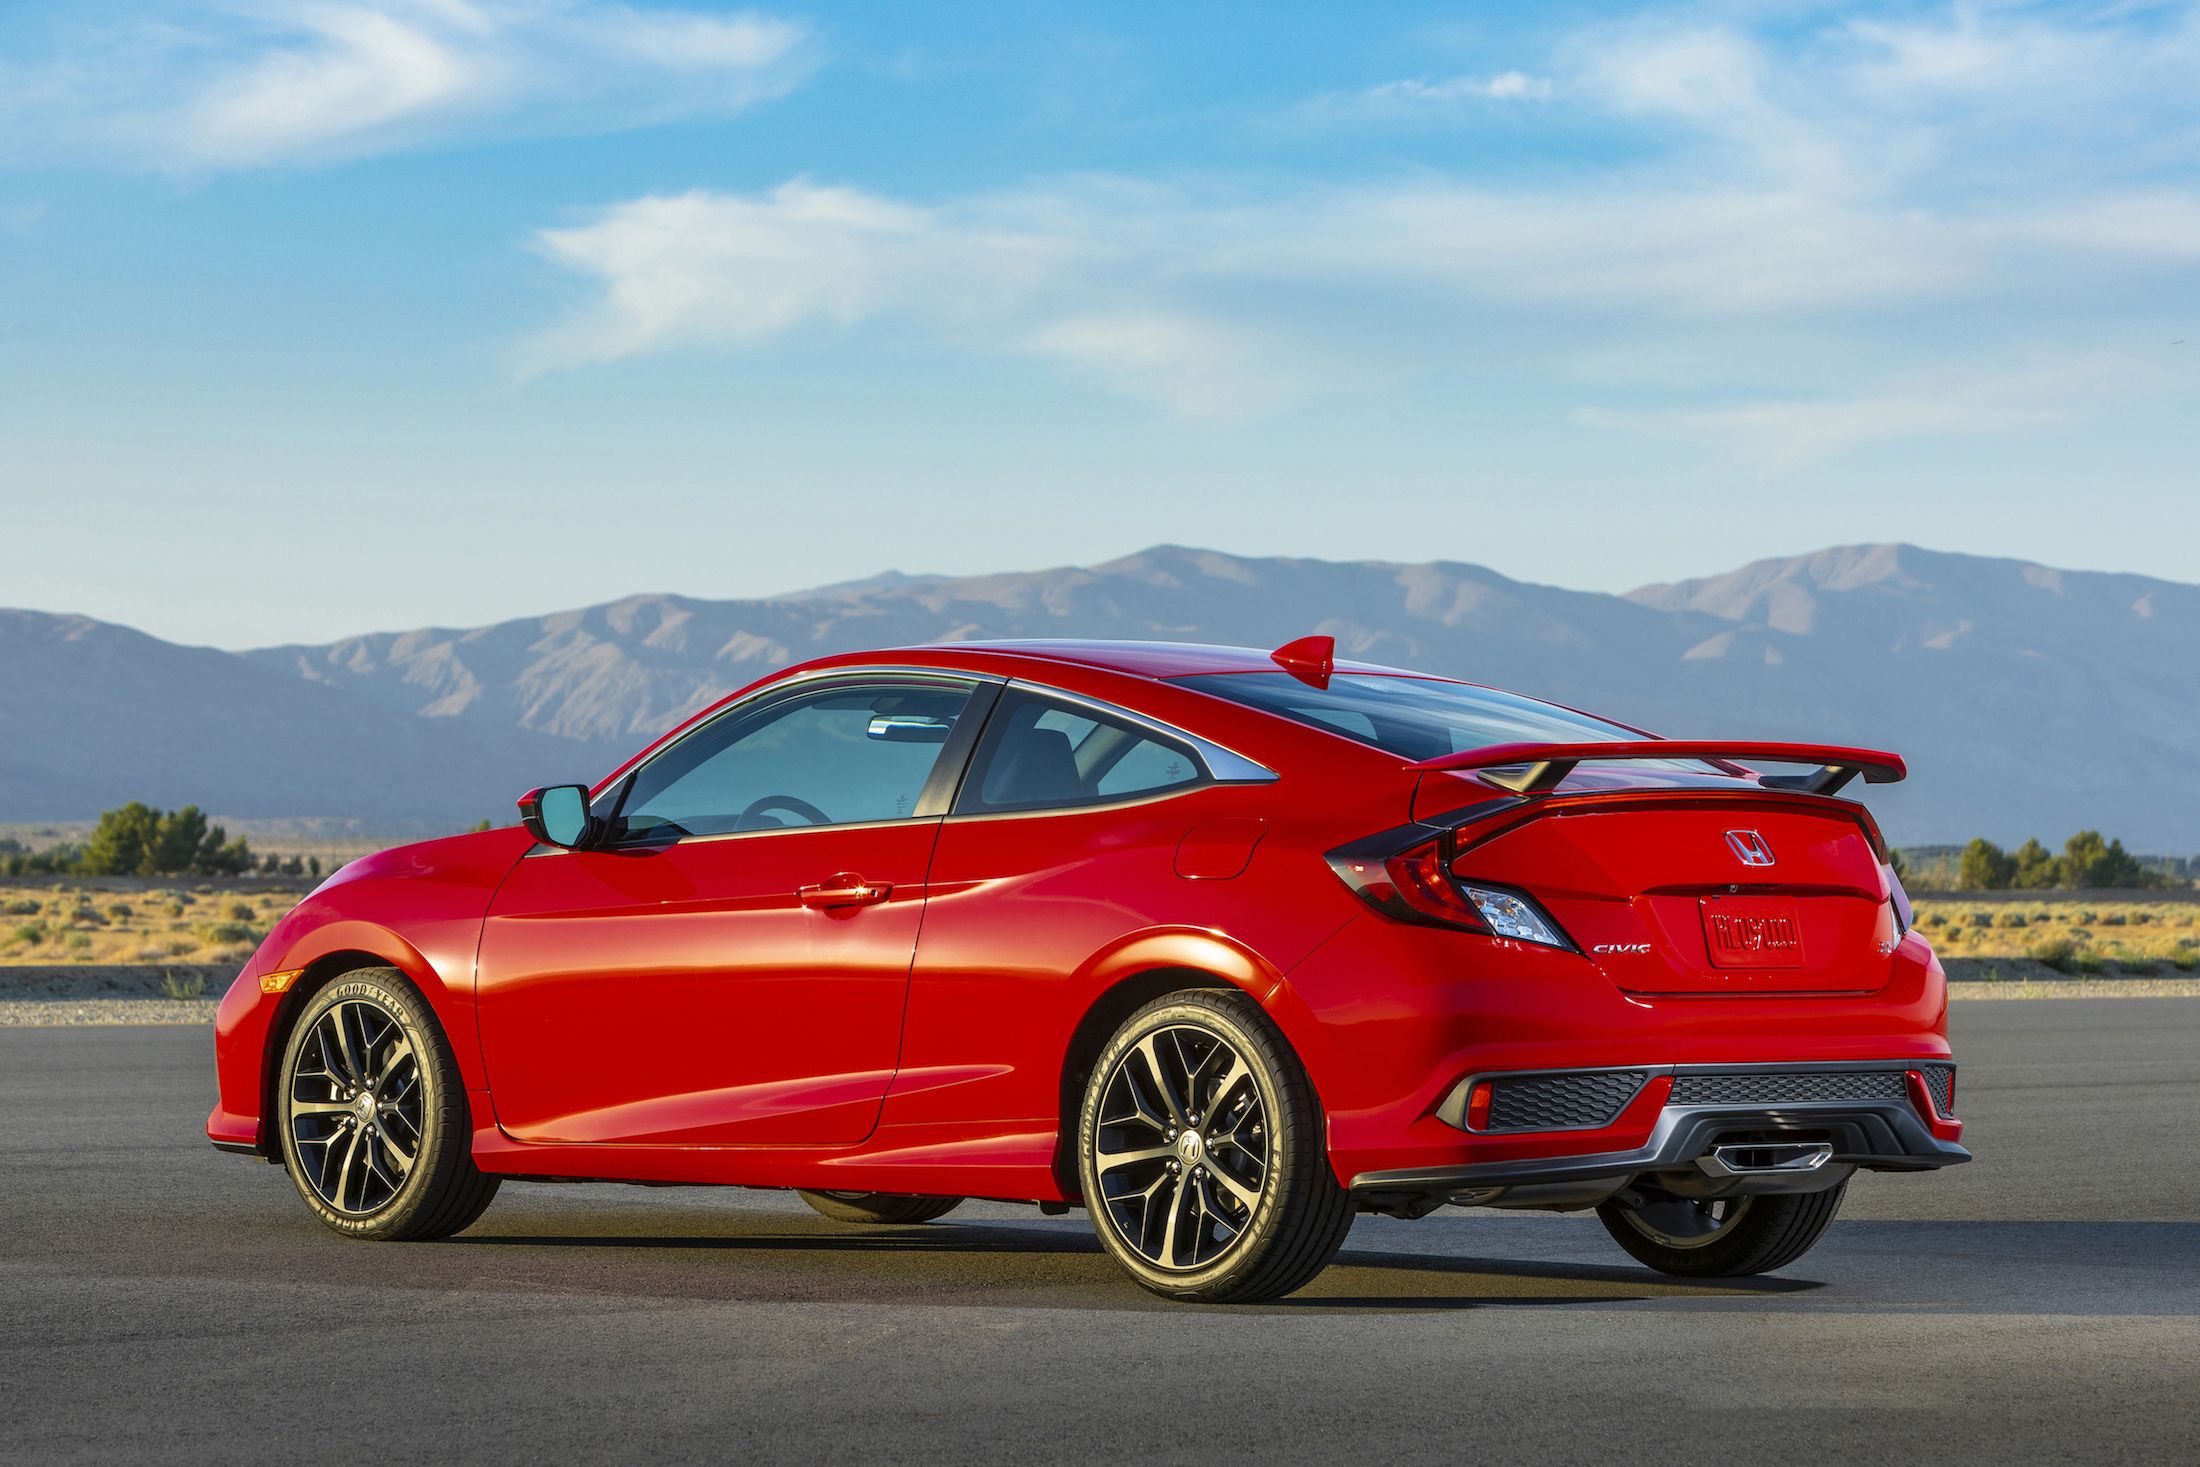 2020 honda civic si updated is even more fun for the money 2020 honda civic si updated is even